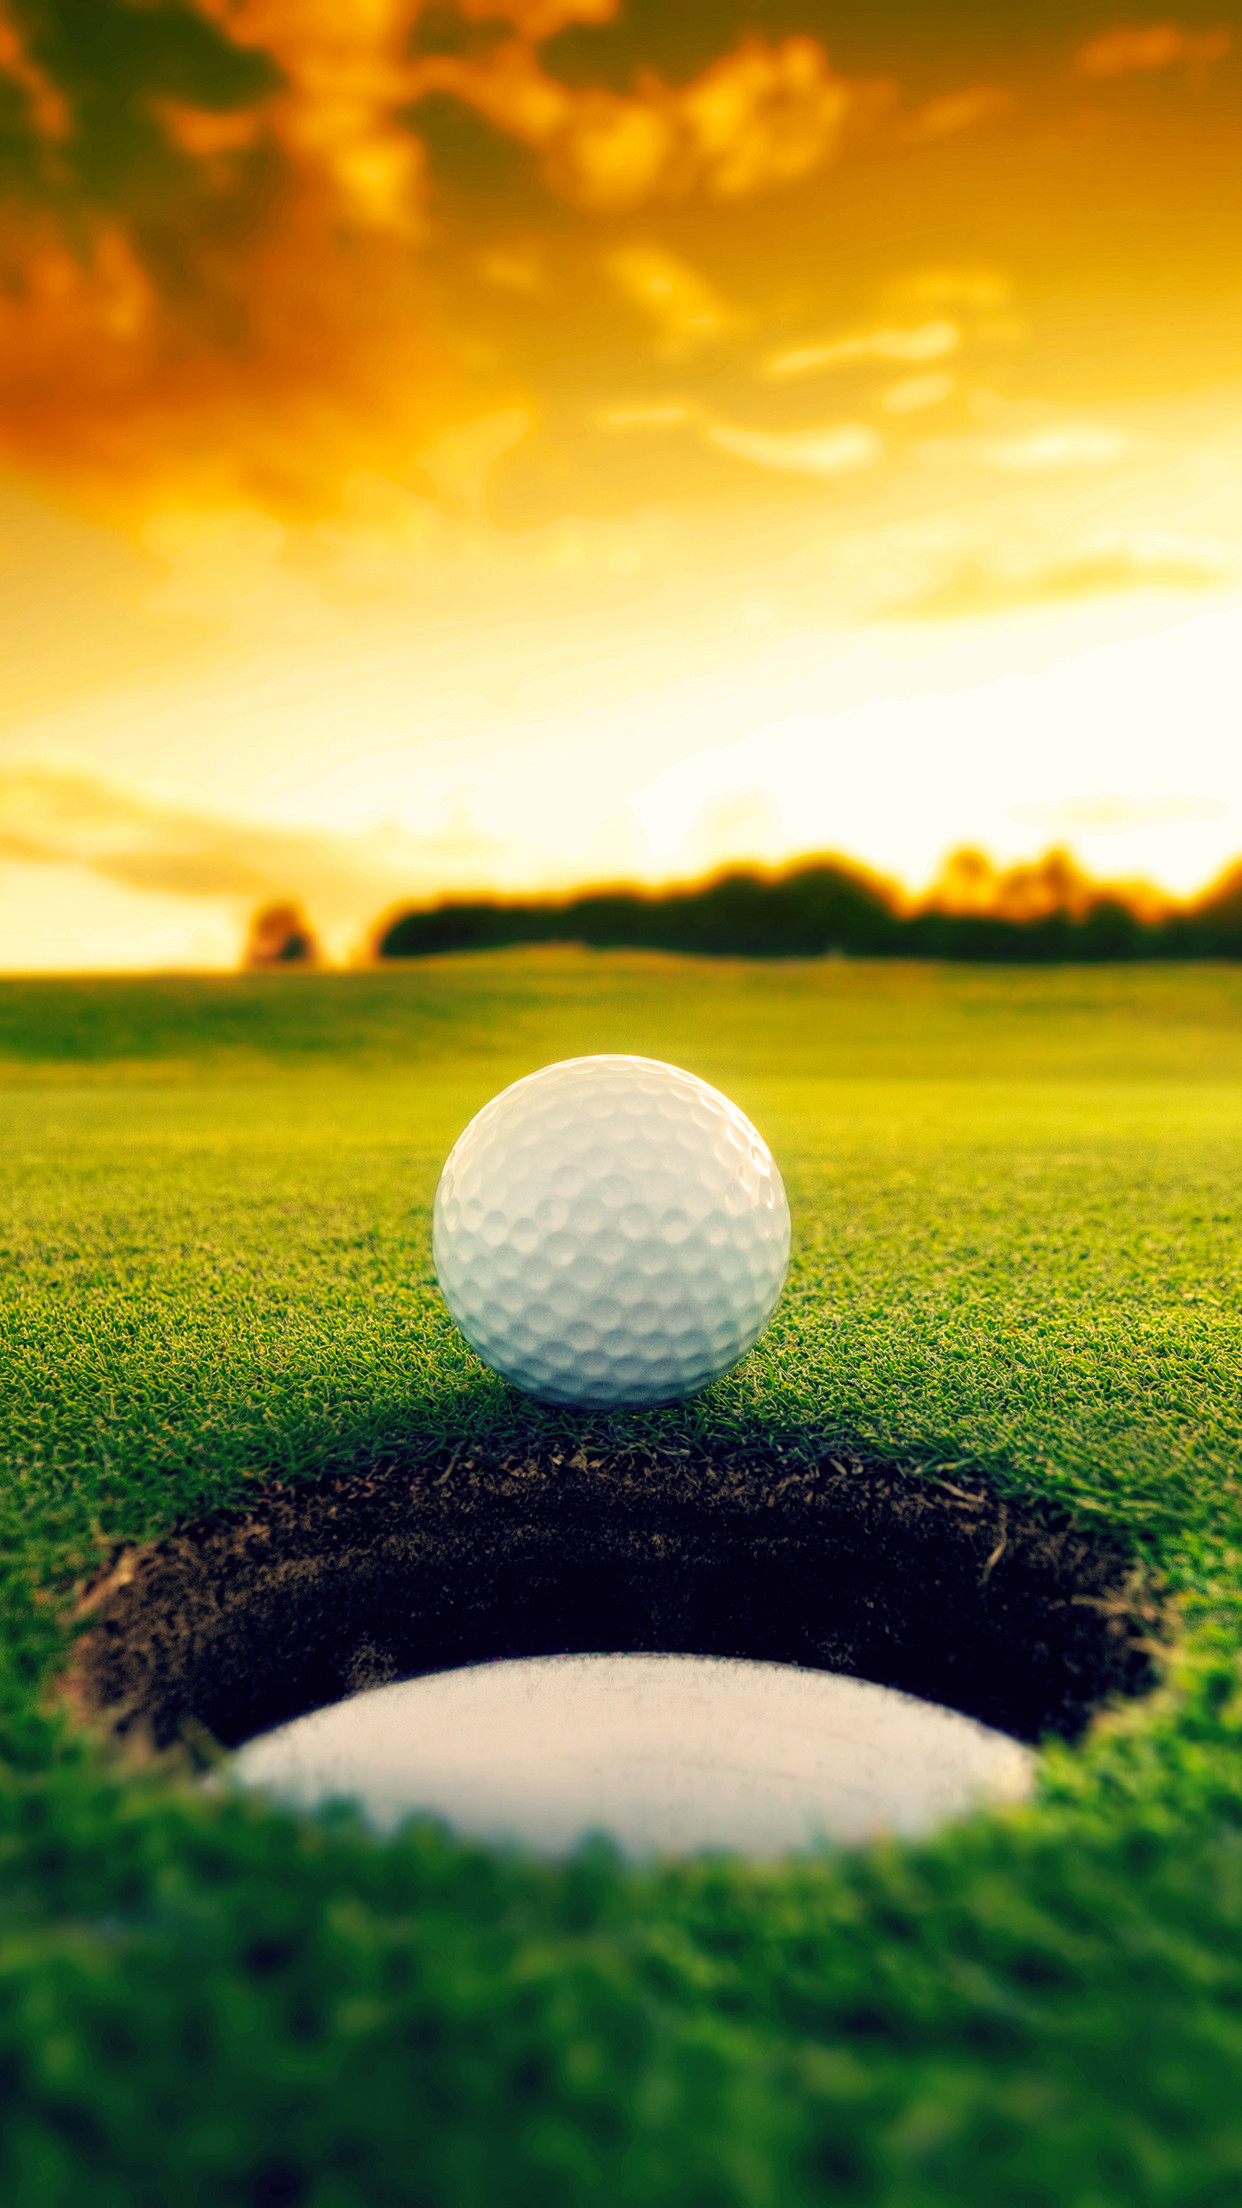 iPhone Golf Wallpaper (60+ images)